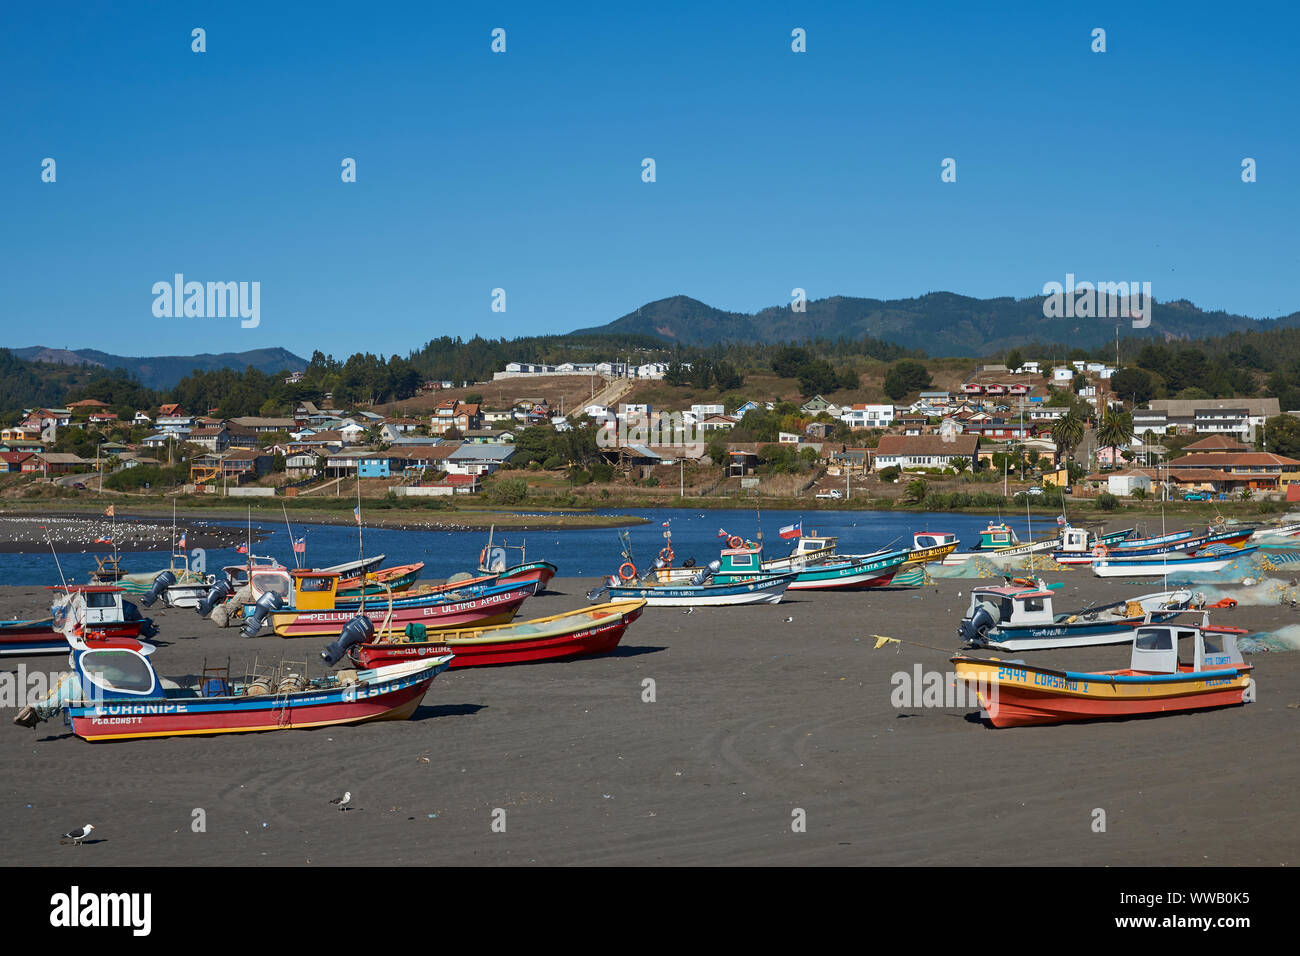 Colourful fishing boats on the beach in the small fishing village of Curanipe in the Maule Region of Chile. Stock Photo